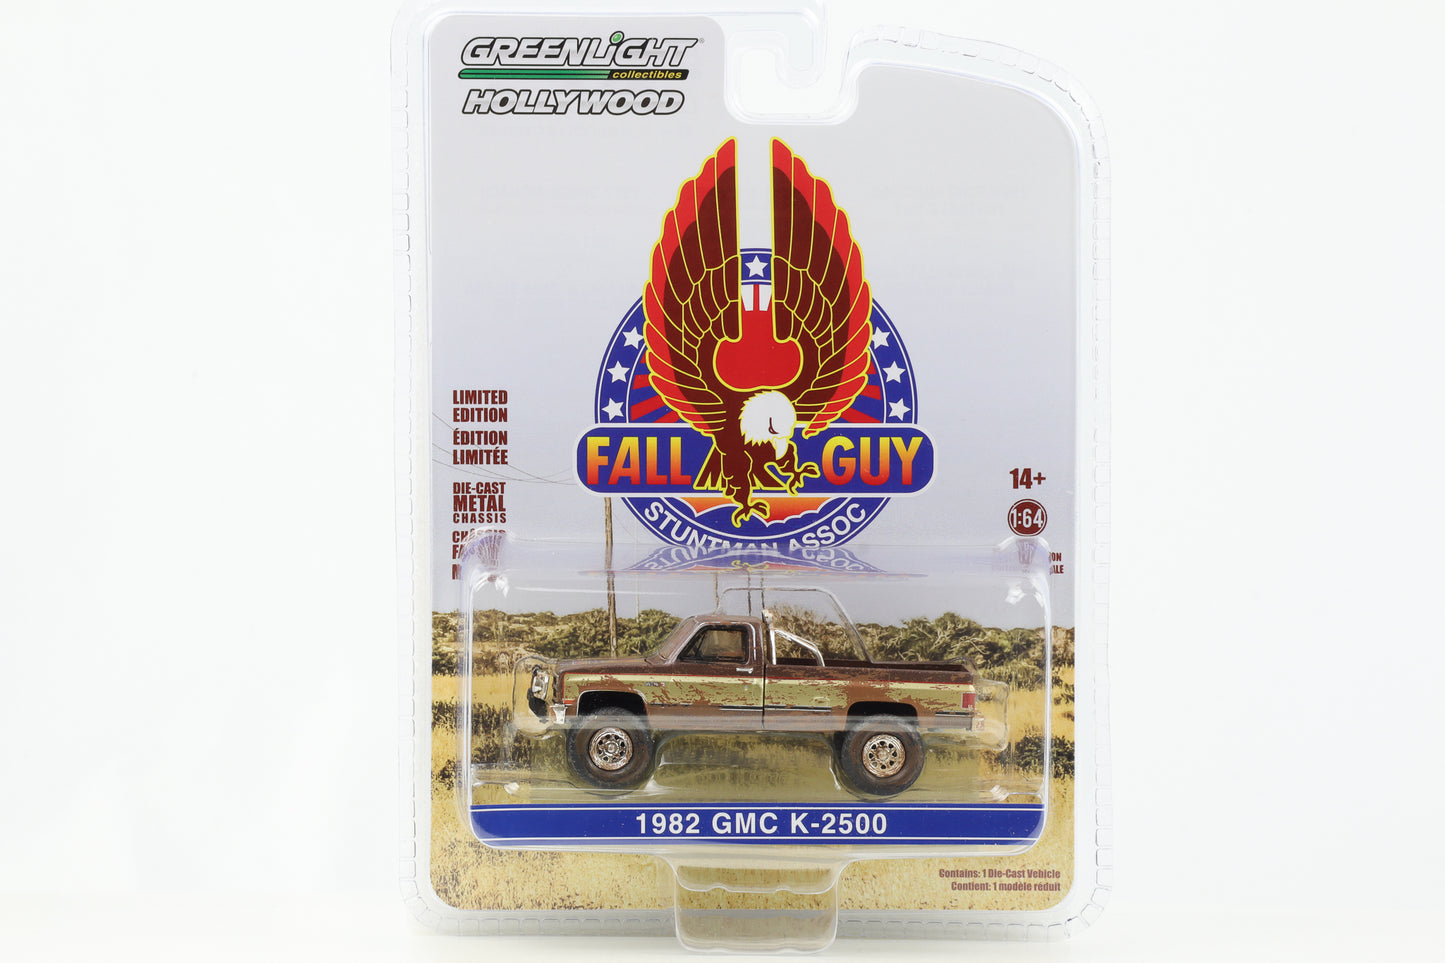 1:64 1982 GMC K-2500 Case Guy Colt Cases dirty Greenlight Hollywood